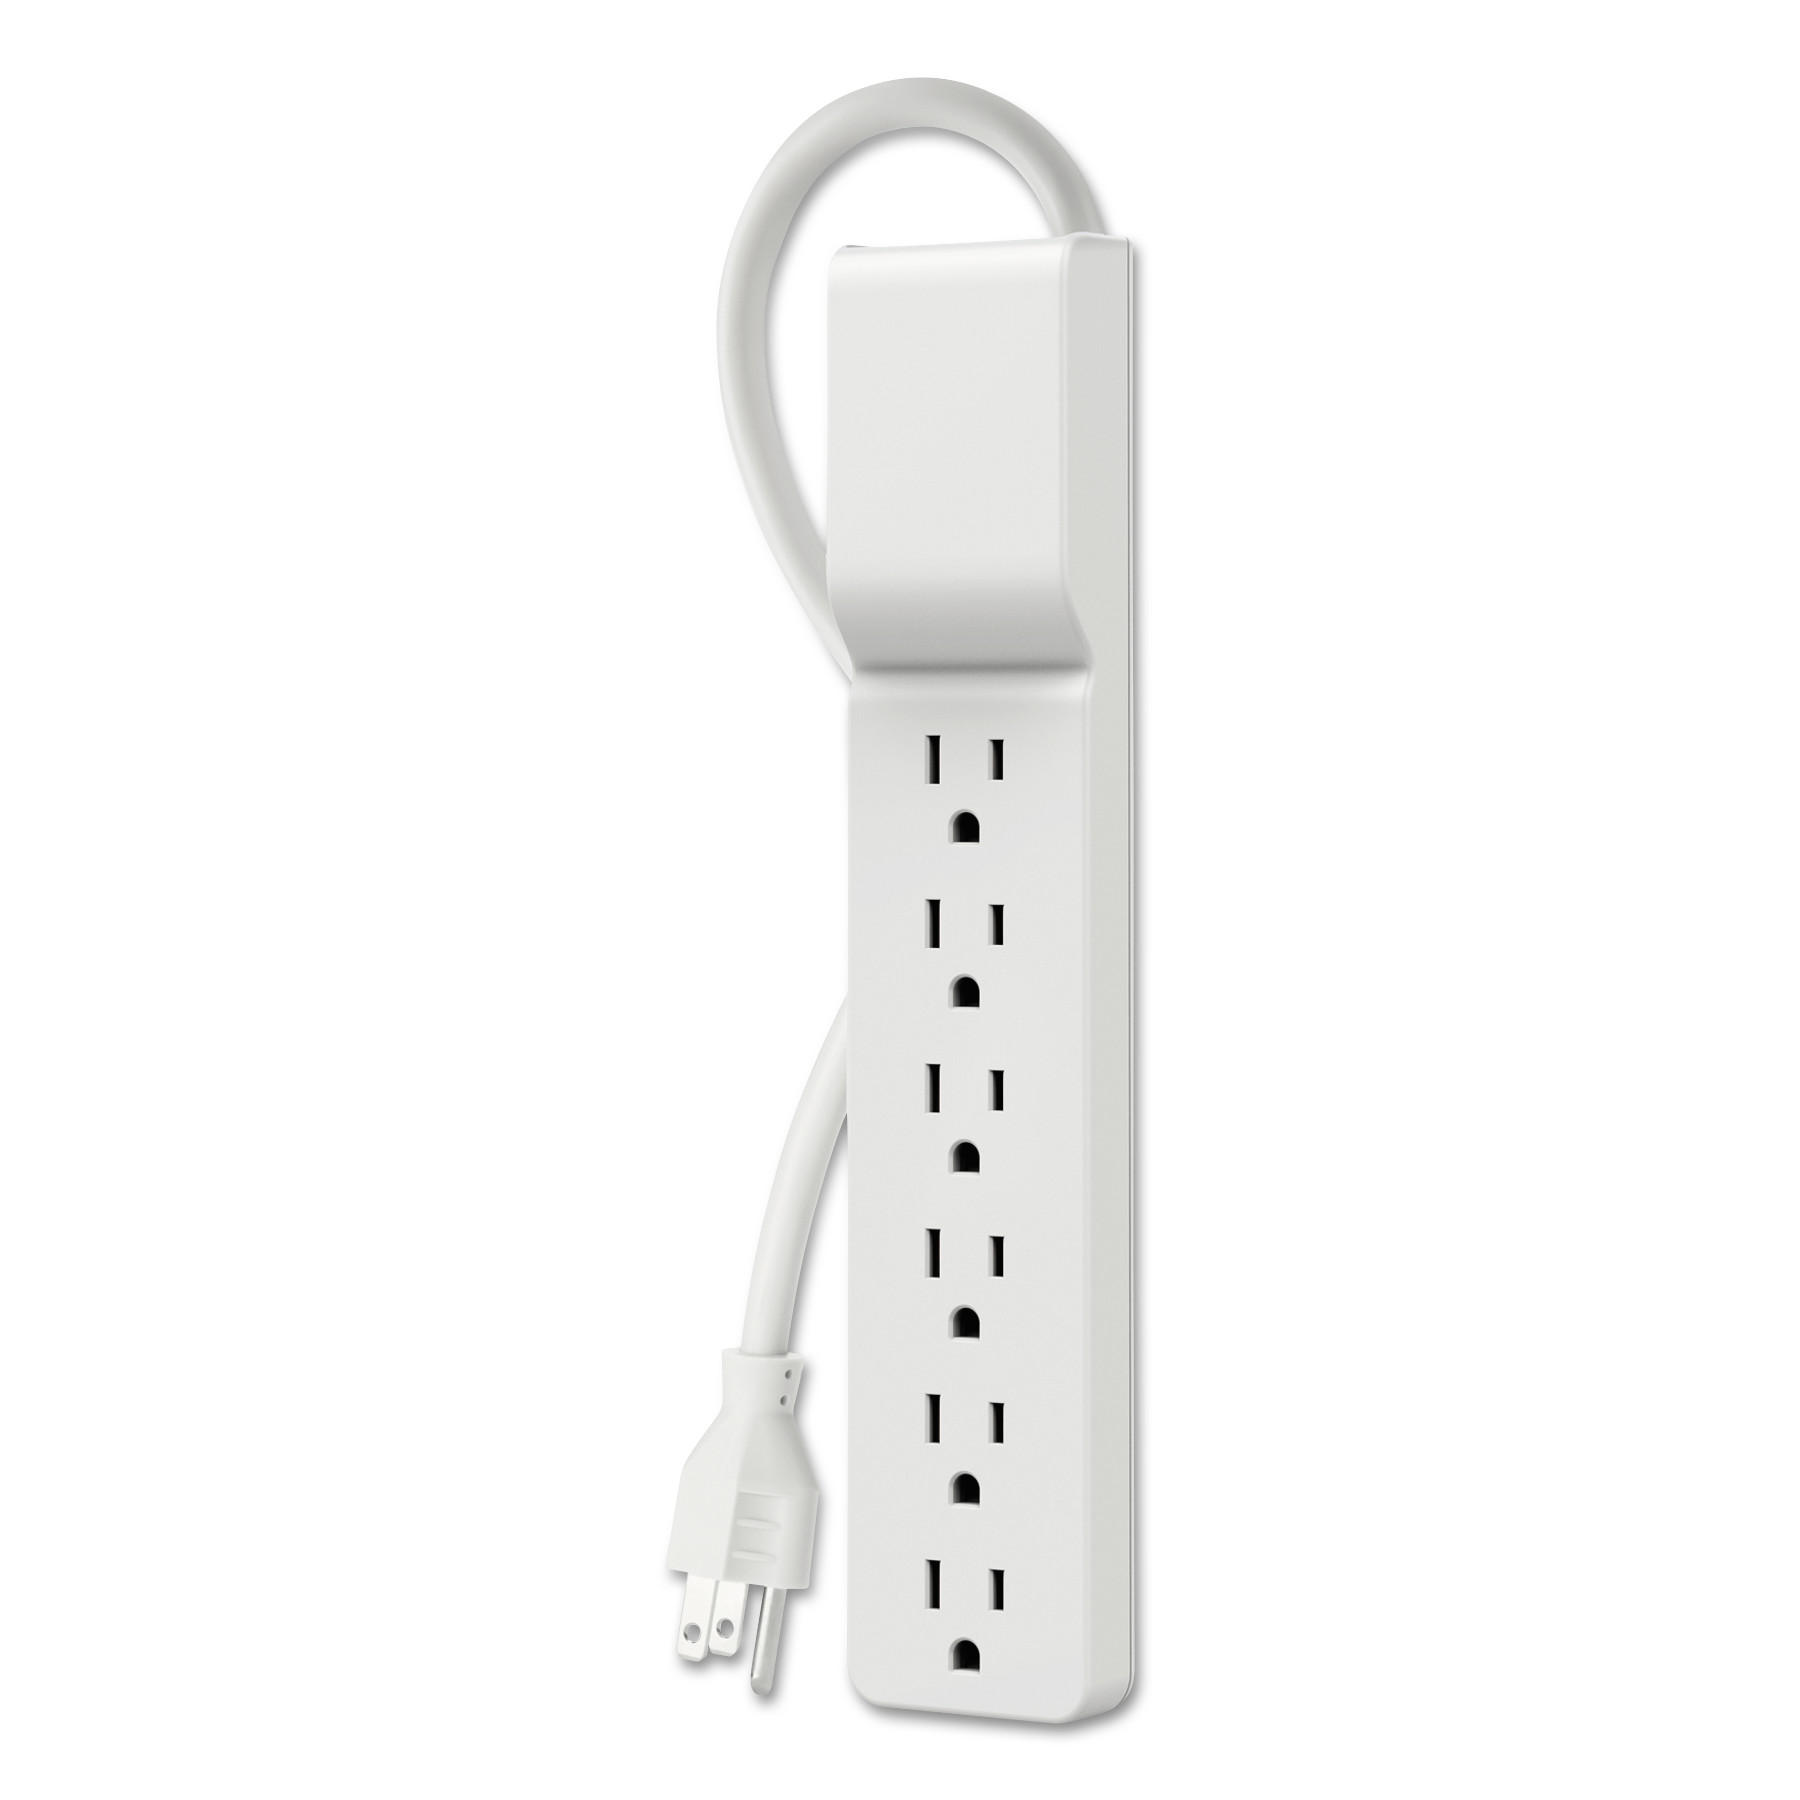  Belkin BE106000-10 Home/Office Surge Protector, 6 Outlets, 10 ft Cord, 720 Joules, White (BLKBE10600010) 